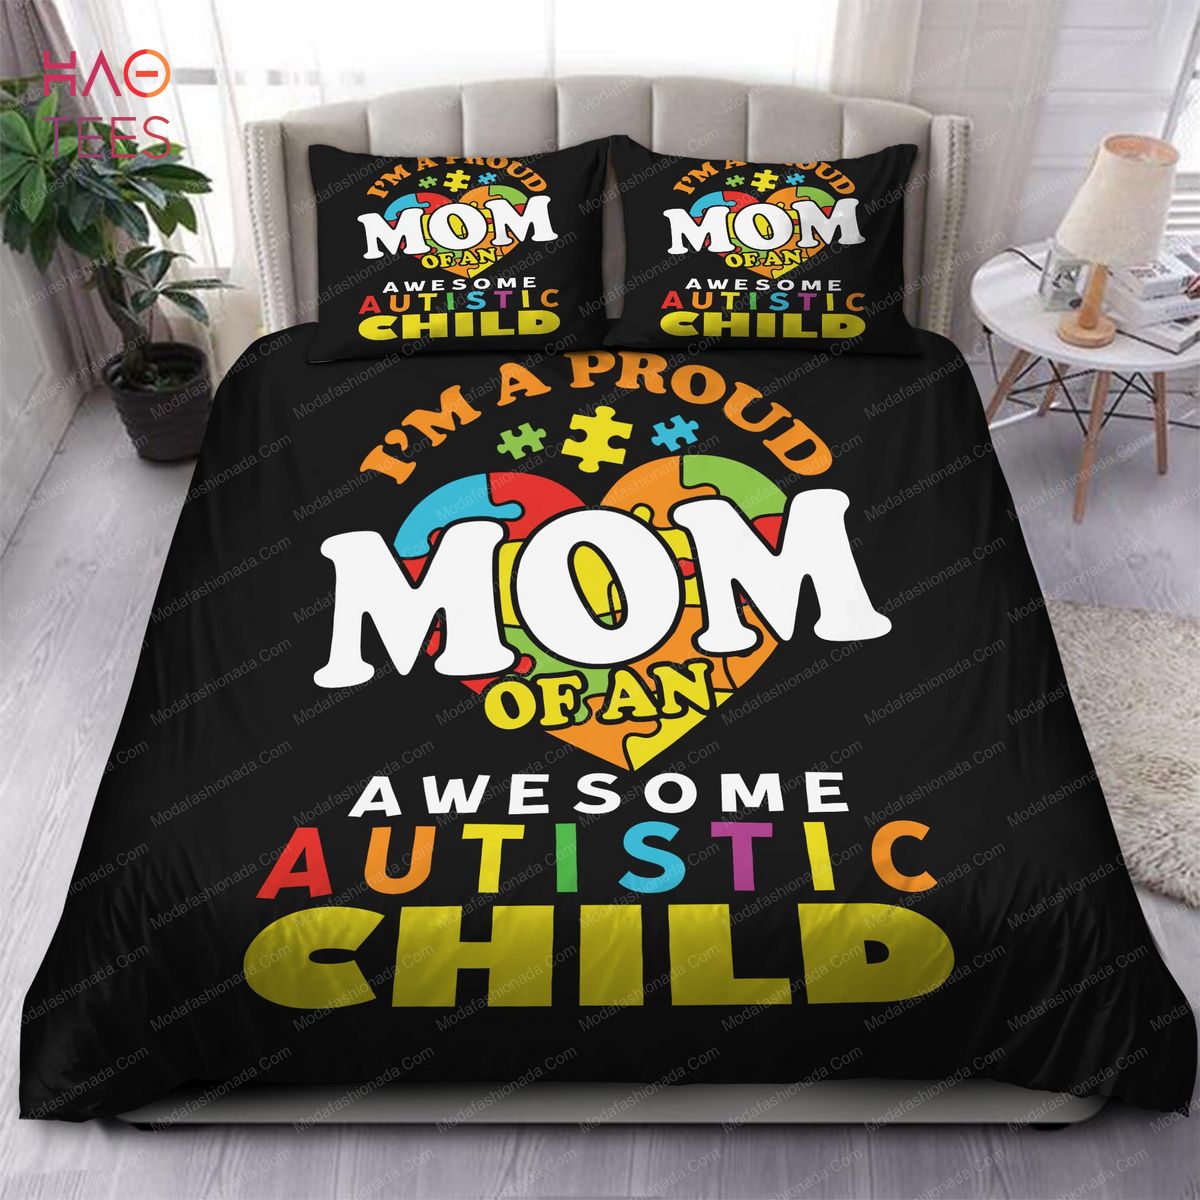 I’m A Proud Mom Of An Awesome Autistic Child Bedding Sets